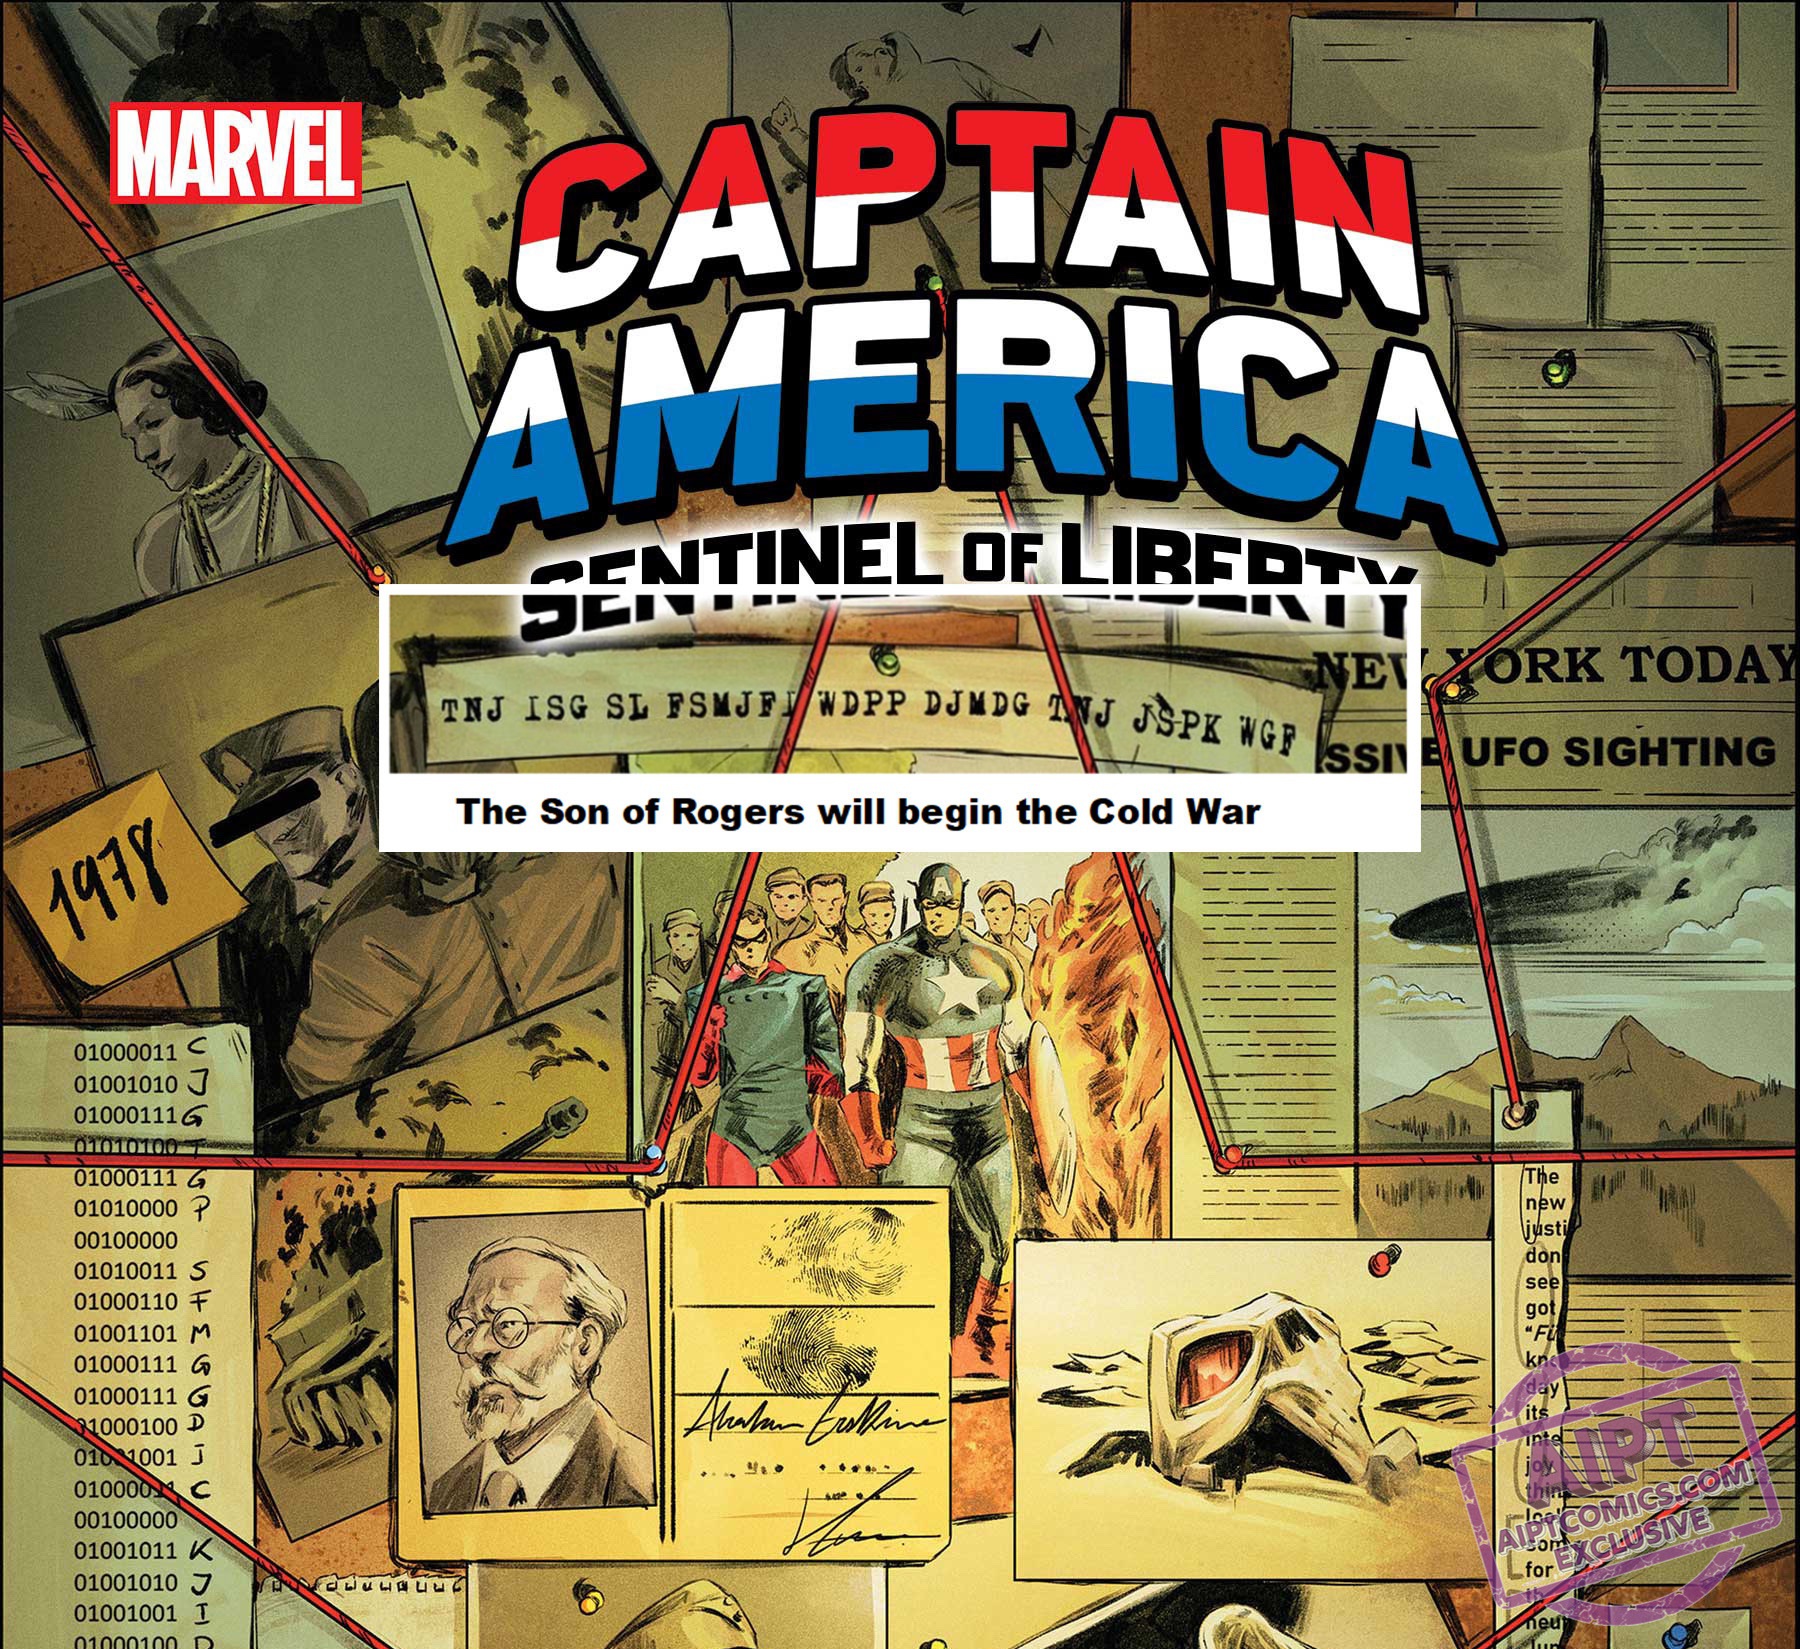 'Captain America: Sentinel of Liberty' shouts out real-life codebreakers